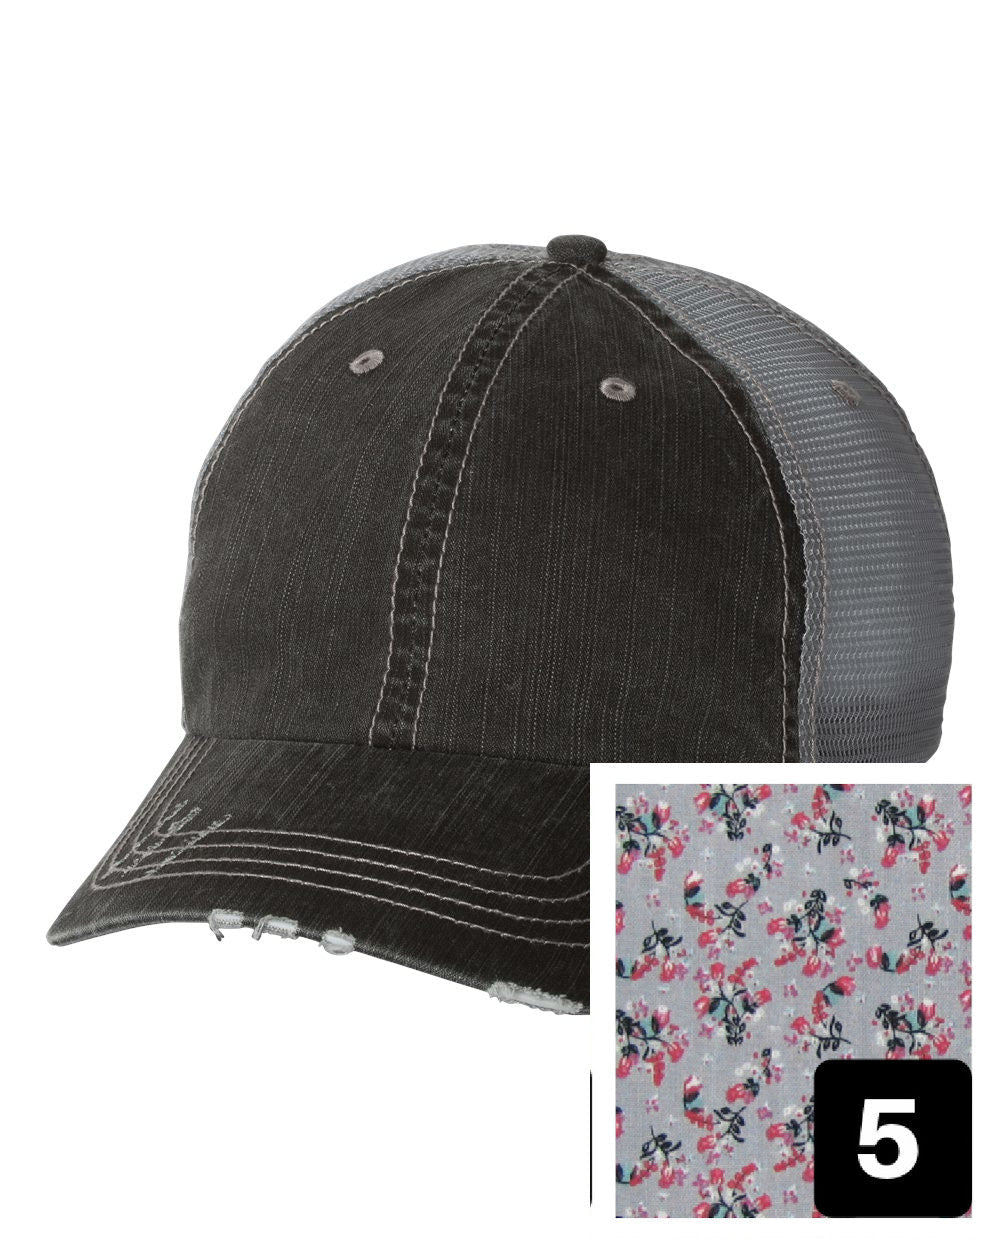 gray distressed trucker hat with purple and pink floral fabric state of Oregon